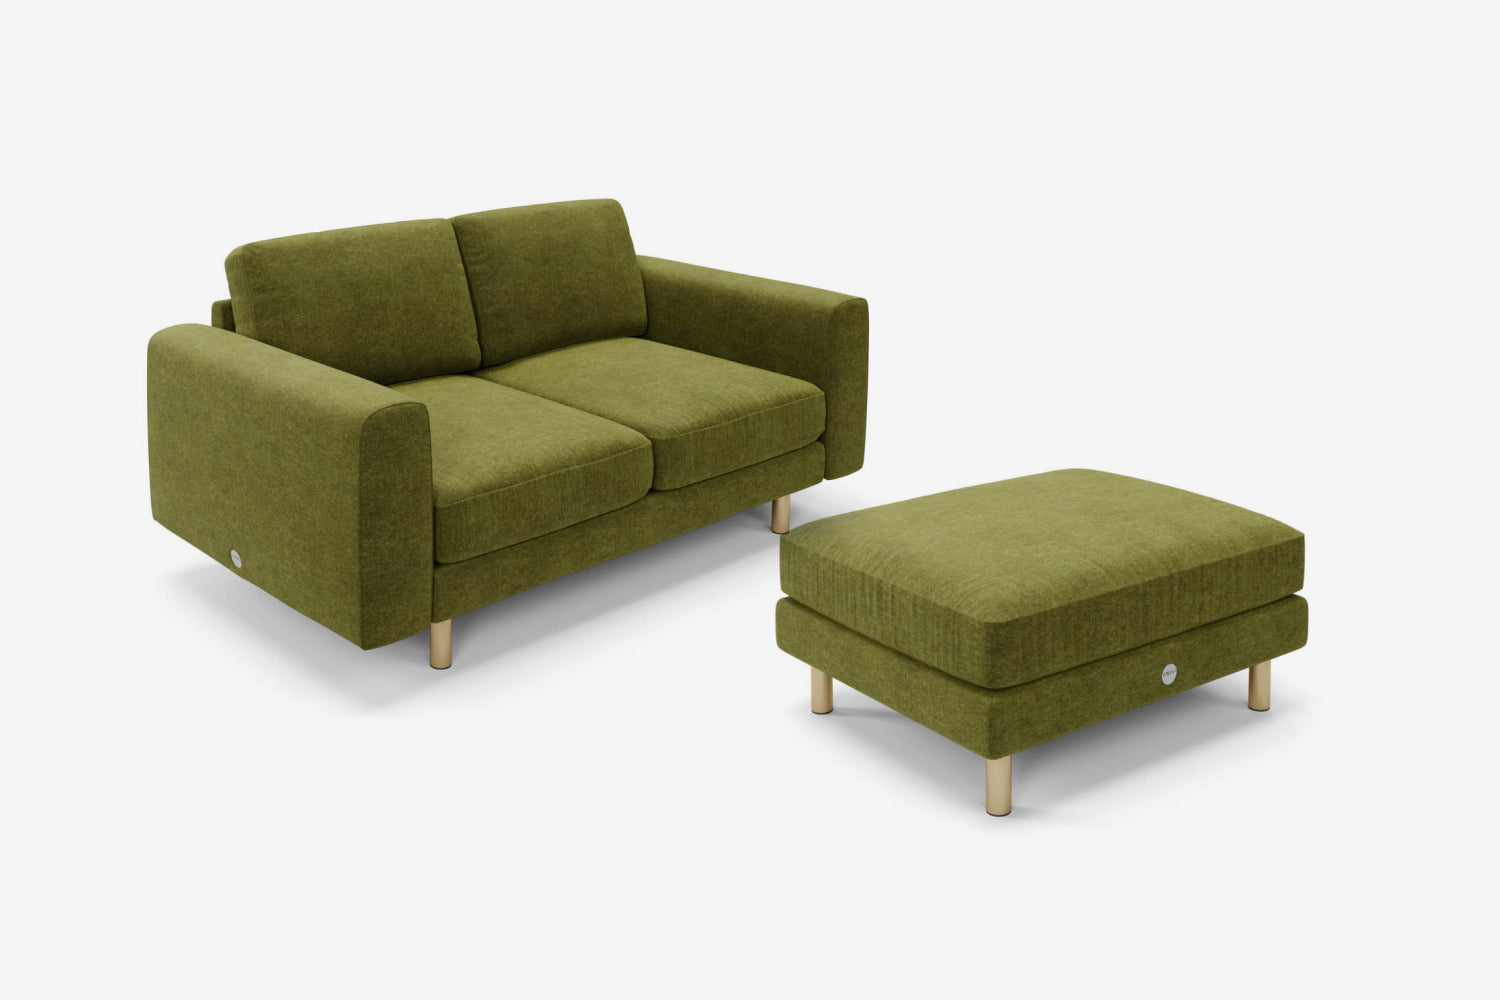 The Big Chill - 2 Seater Sofa and Footstool Set - Moss